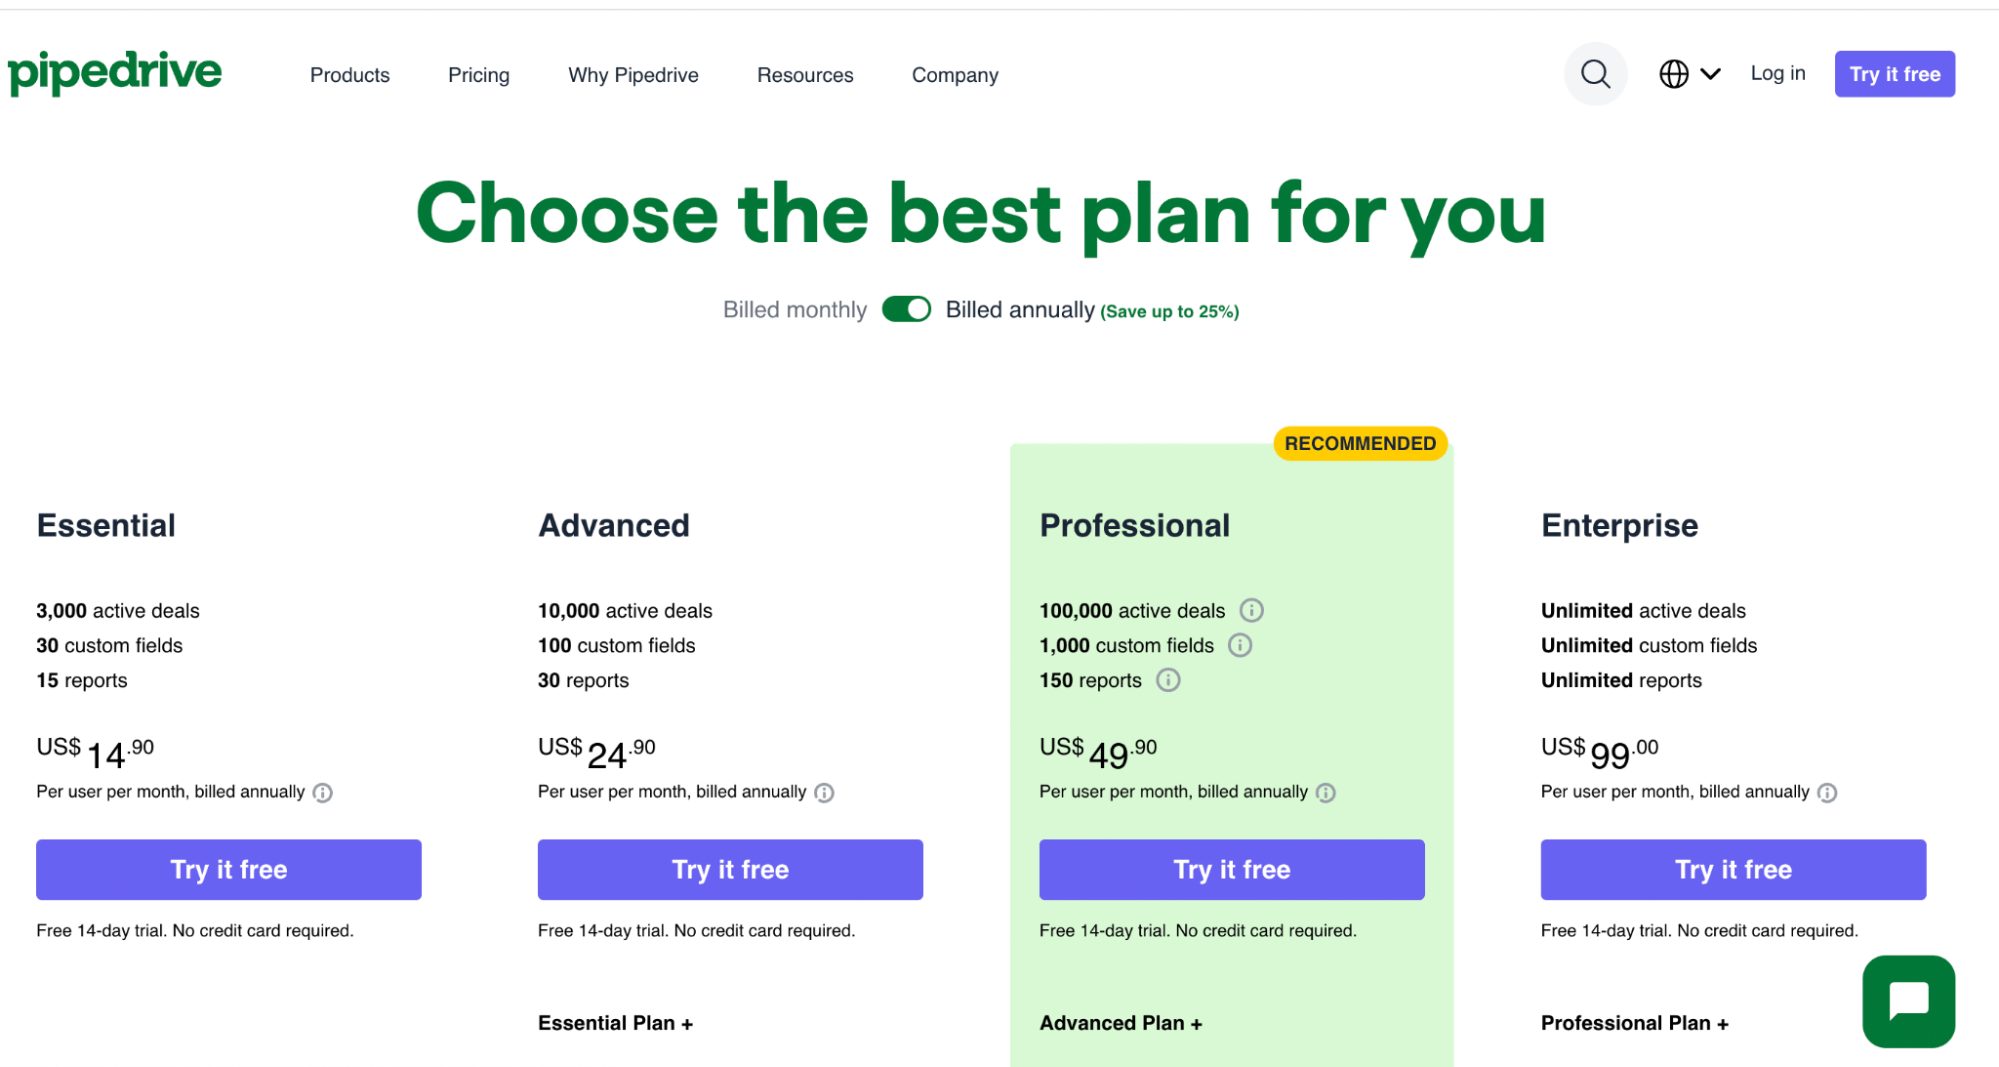 pipedrive pricing page